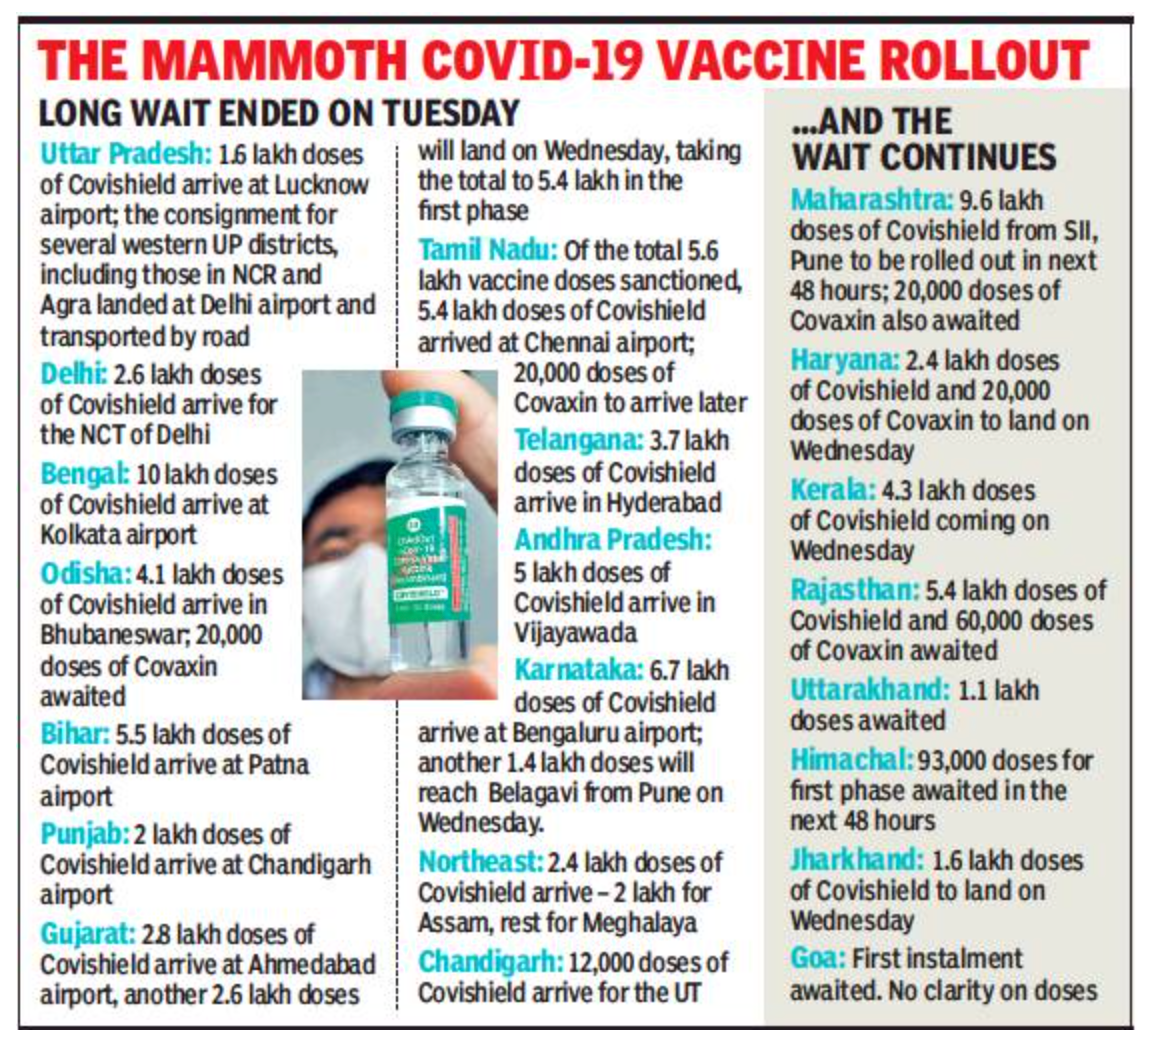 India’s biggest vaccine rollout begins as SII ships 55L doses